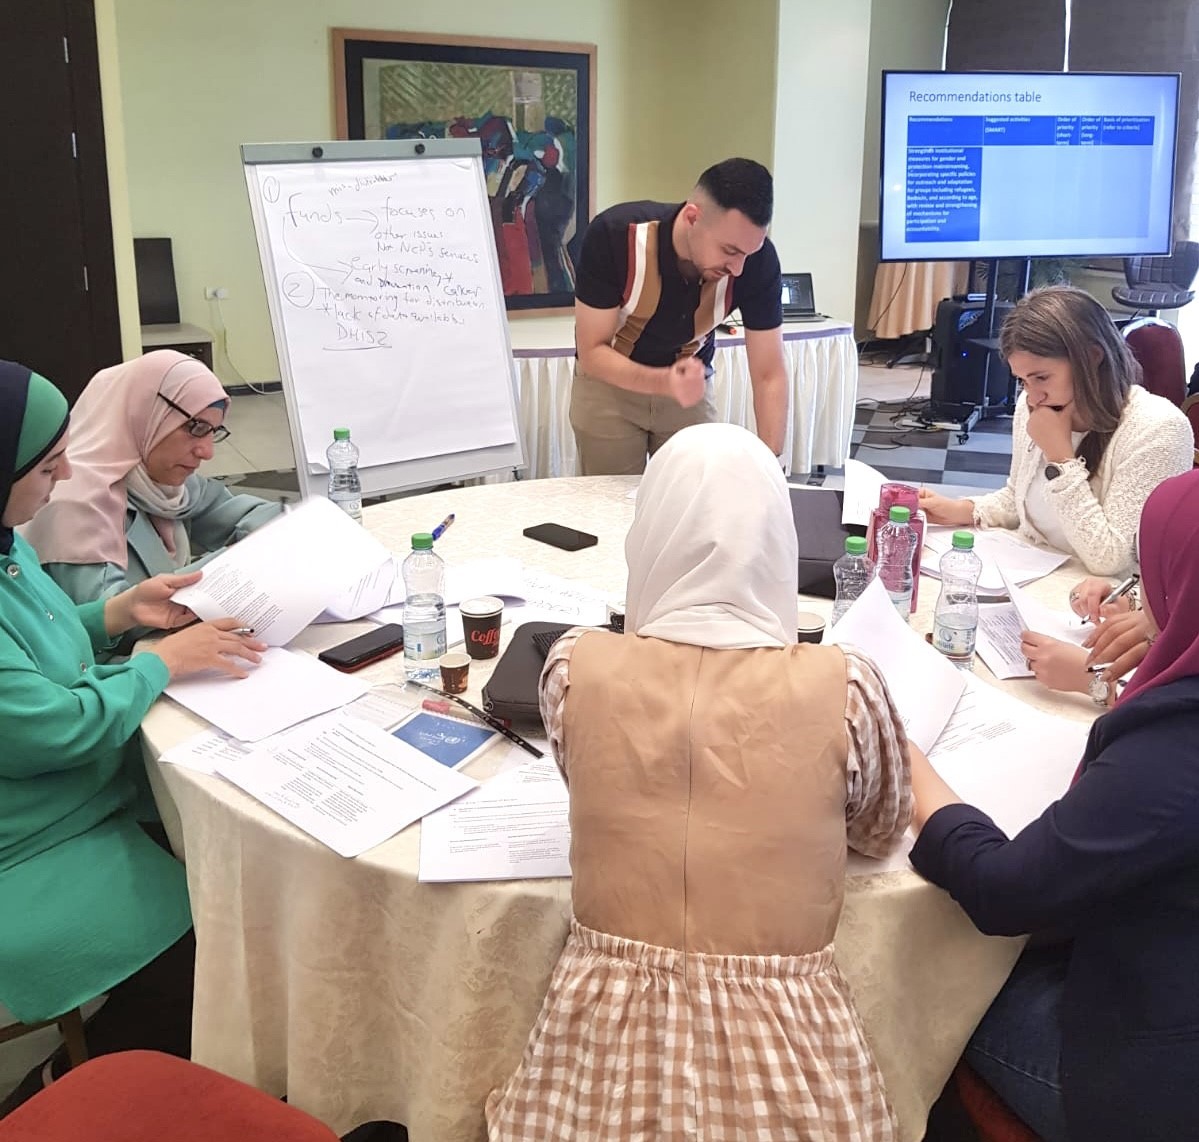 “Differential access to health care for communities is a critical factor determining health inequities.” @palestinemoh and @WHO conducted workshops in Gaza and Ramallah to review findings of an assessment of barriers to accessing noncommunicable disease services during COVID-19.